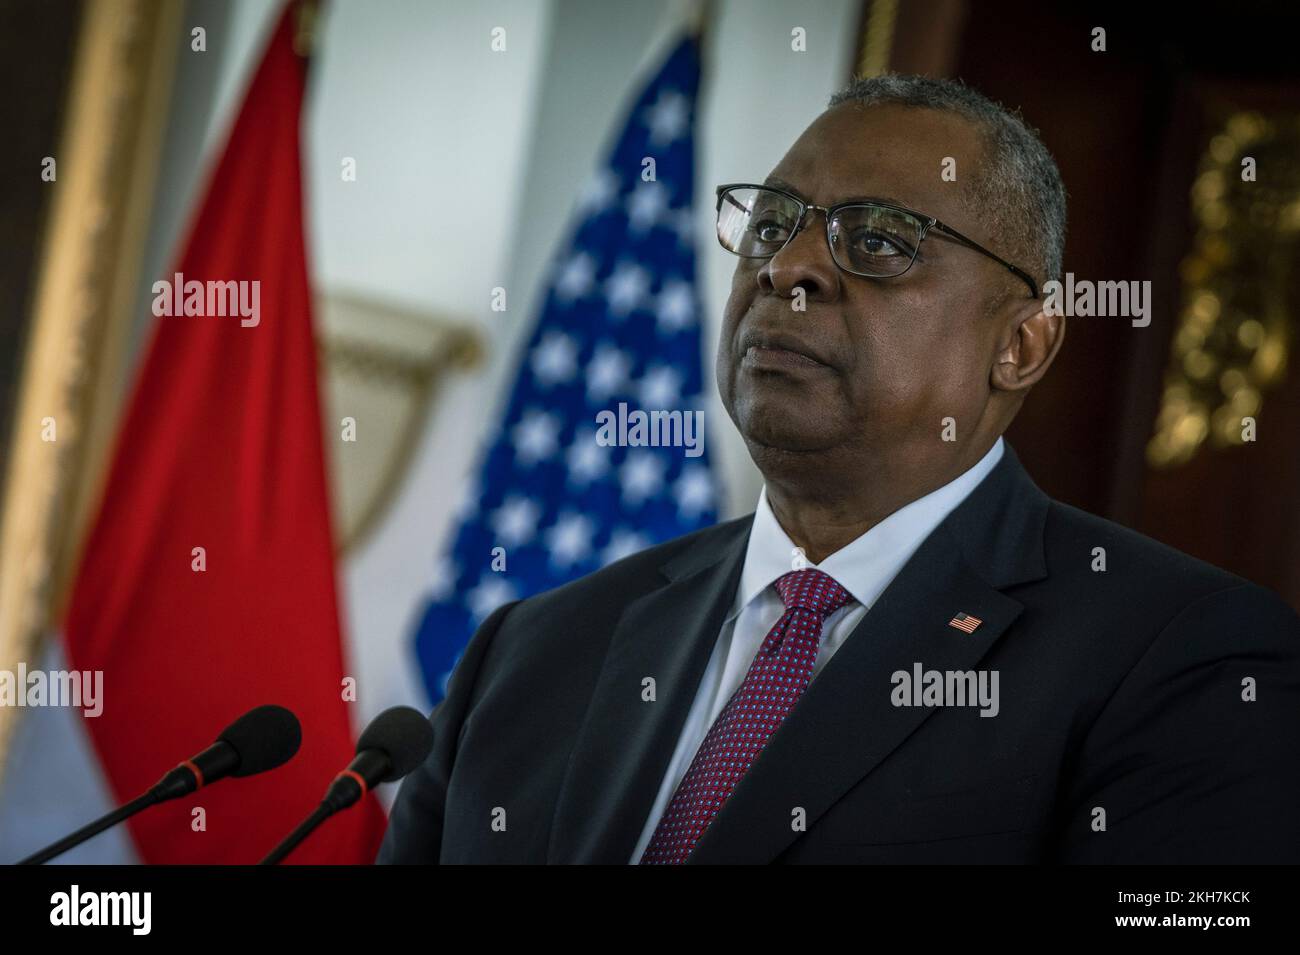 Jakarta, Indonesia. 21 November, 2022. U.S. Secretary of Defense Lloyd J. Austin III, listens to a question during a joint news conference with Indonesian Defense Minister Prabowo Subianto, November 21, 2022 in Jakarta, Indonesia. Credit: Chad J. McNeeley/DOD/Alamy Live News Stock Photo